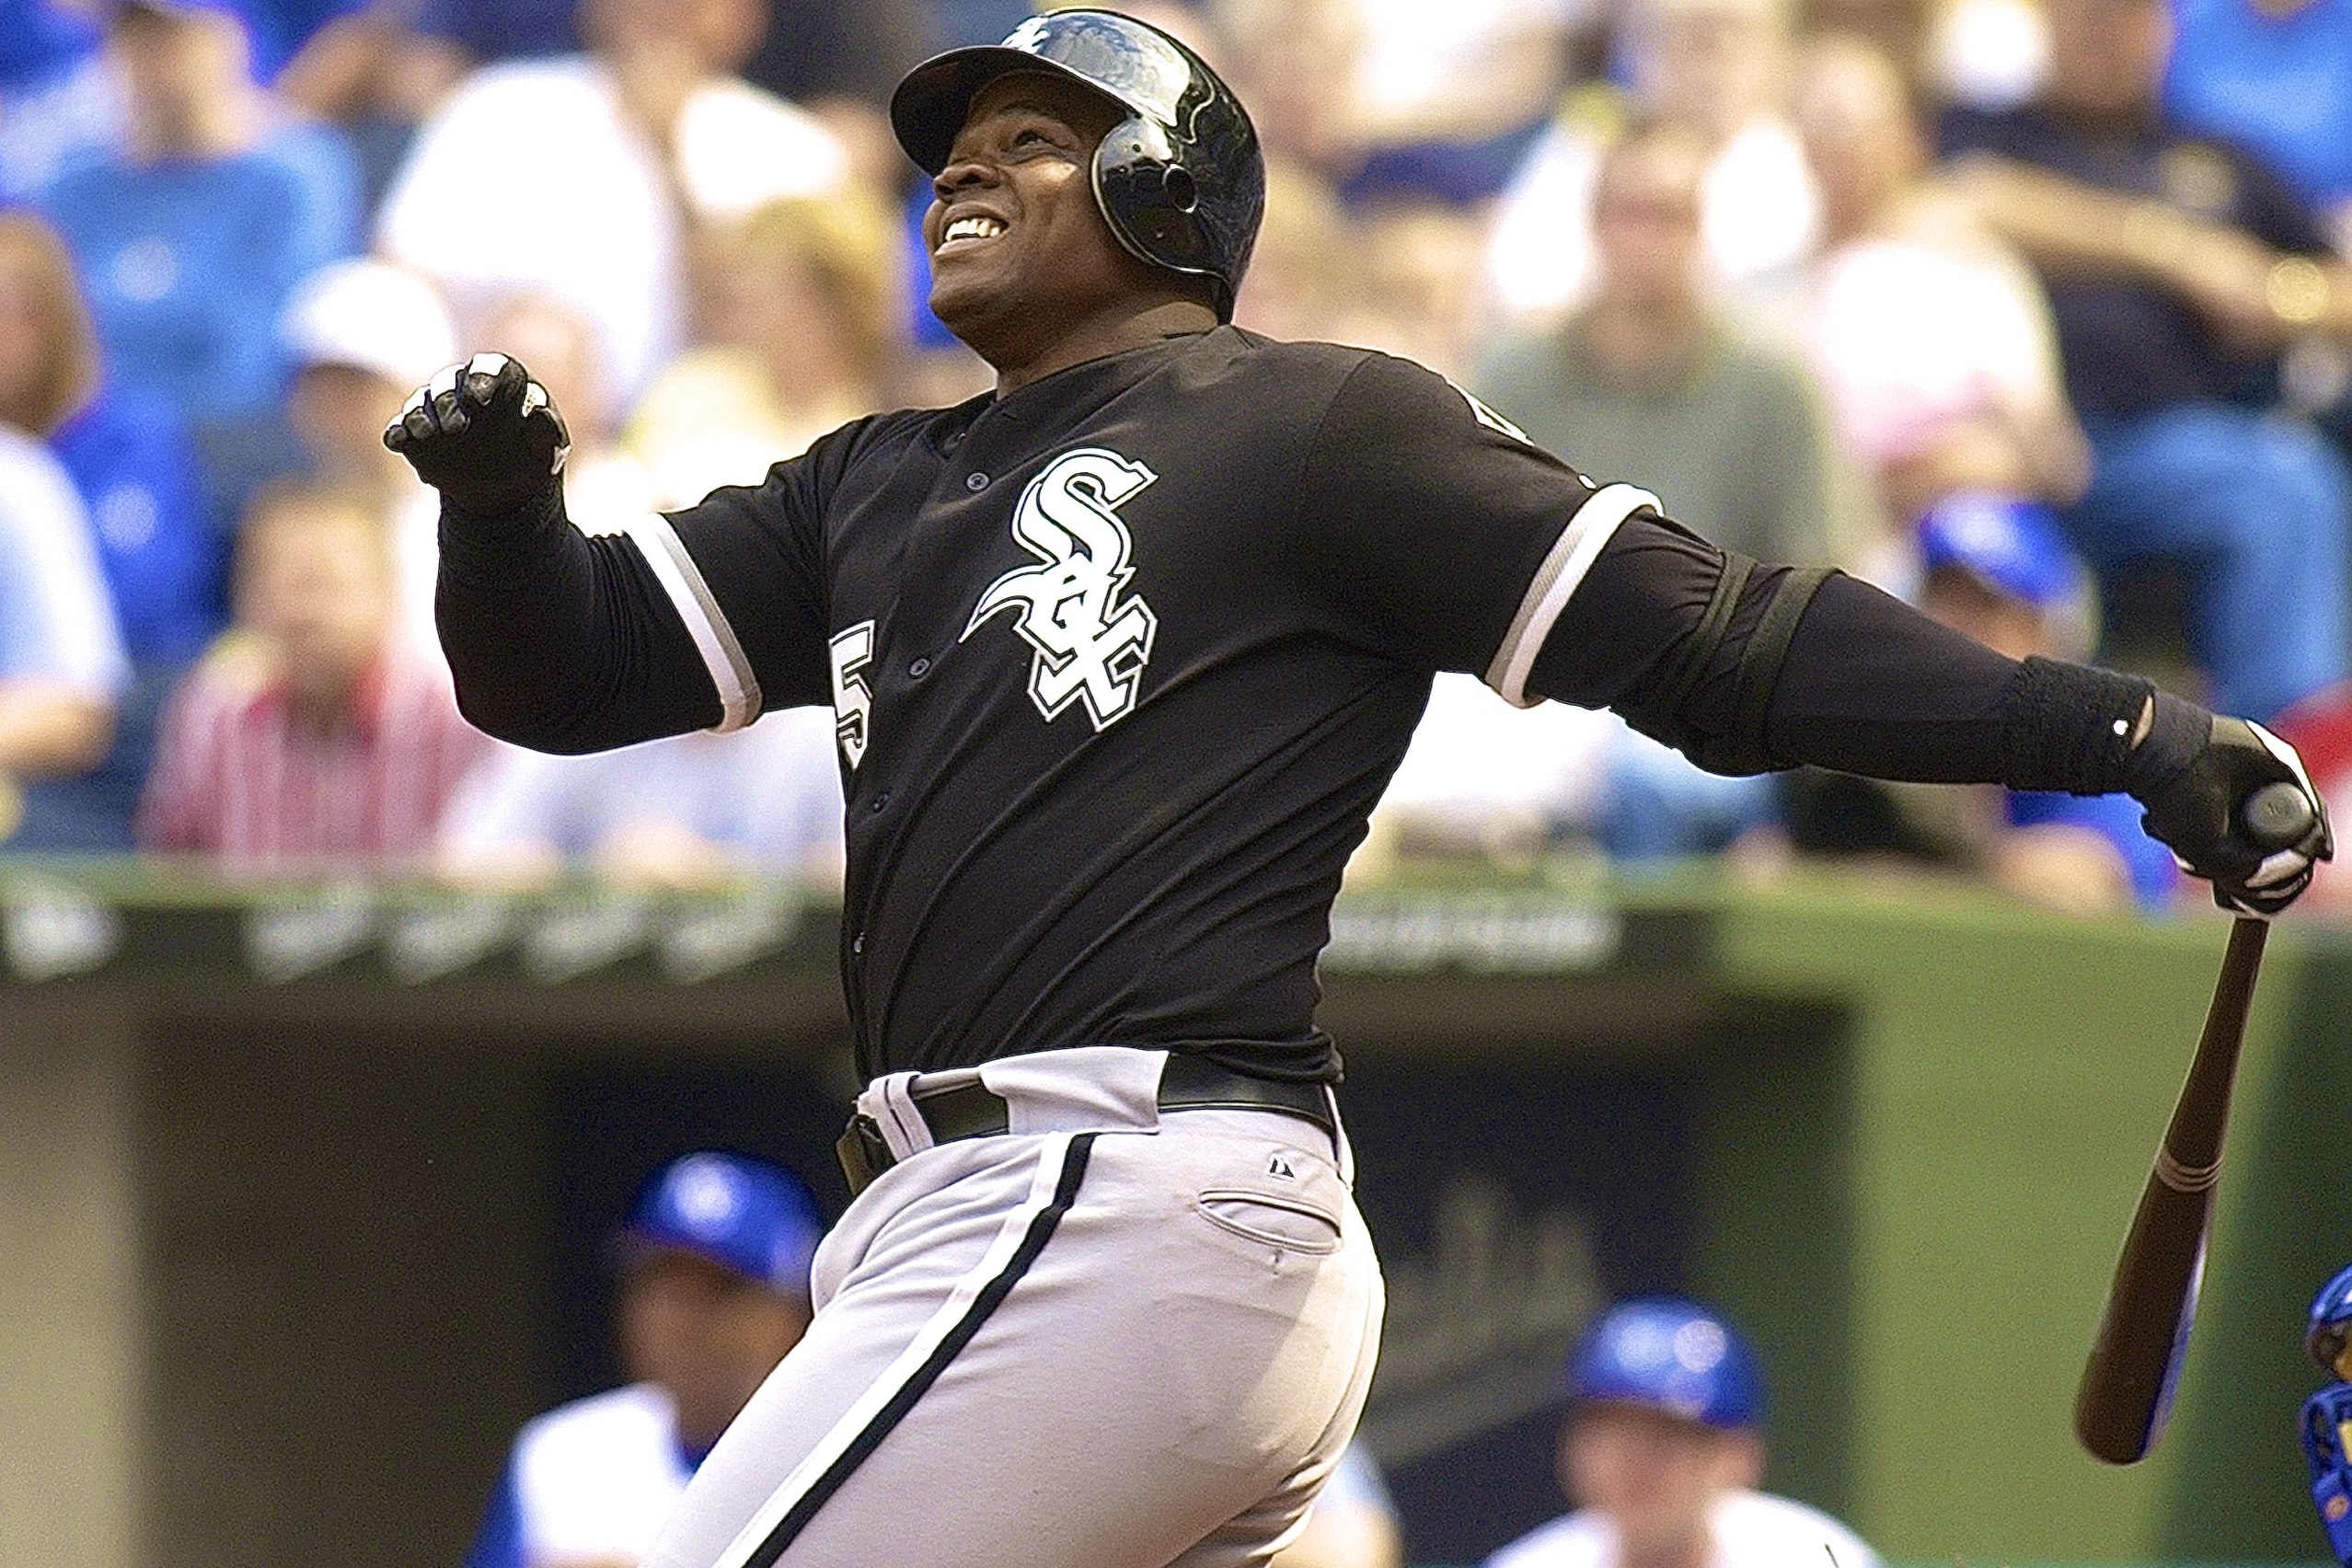 Hall of Famer Frank Thomas has bought controlling interest in